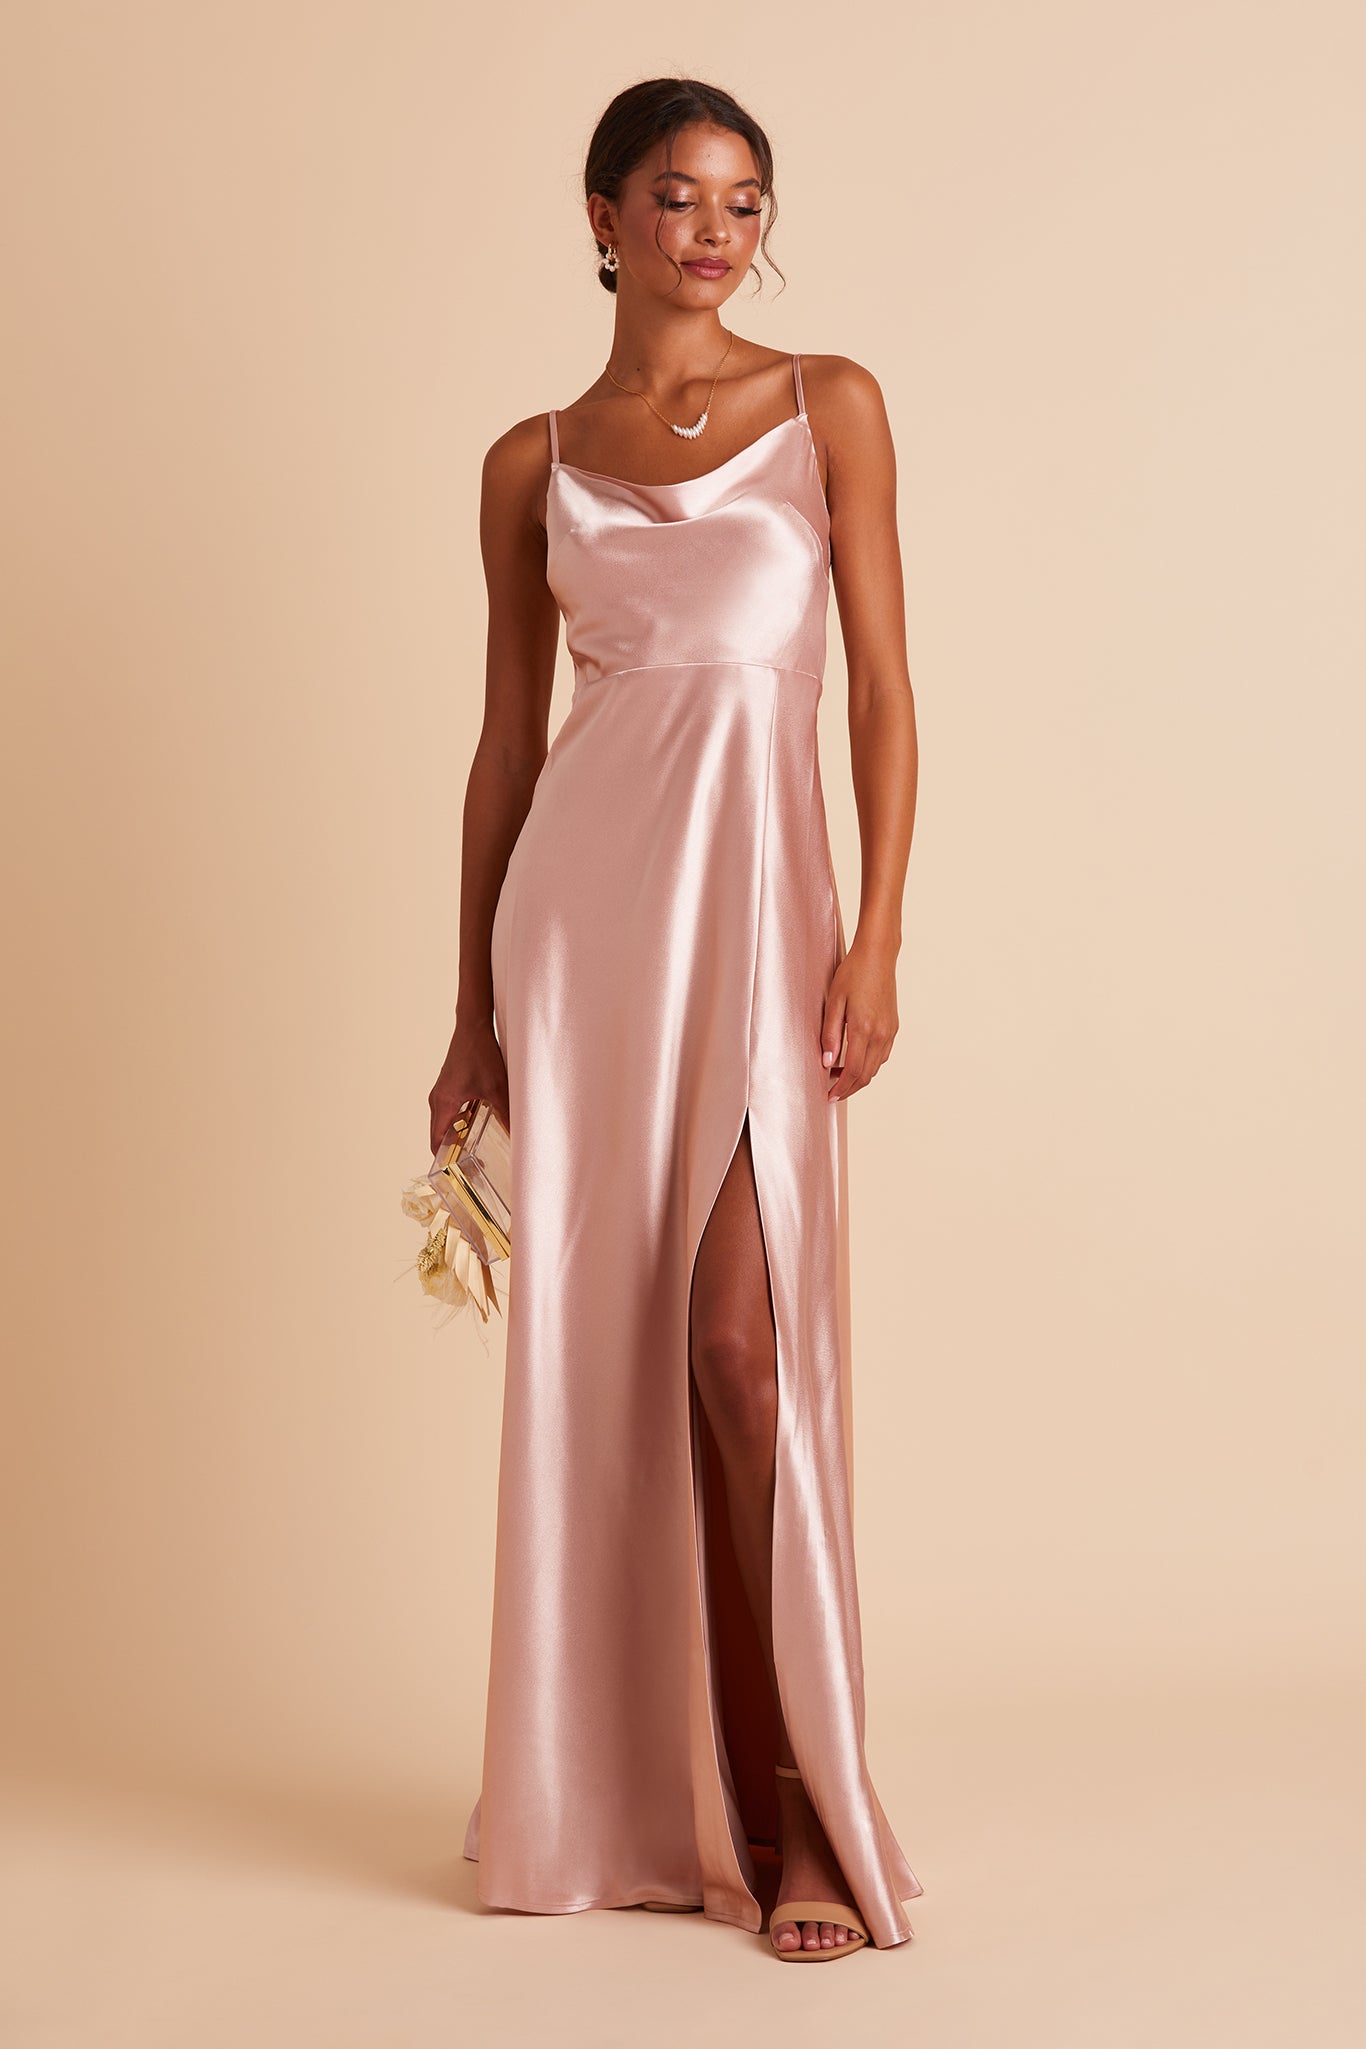 Front view of the Lisa Long Dress in rose gold satin shows a model revealing their leg and foot in the mid-thigh high slit. They wear the Mary Chunky High Heel shoe in nude latte.